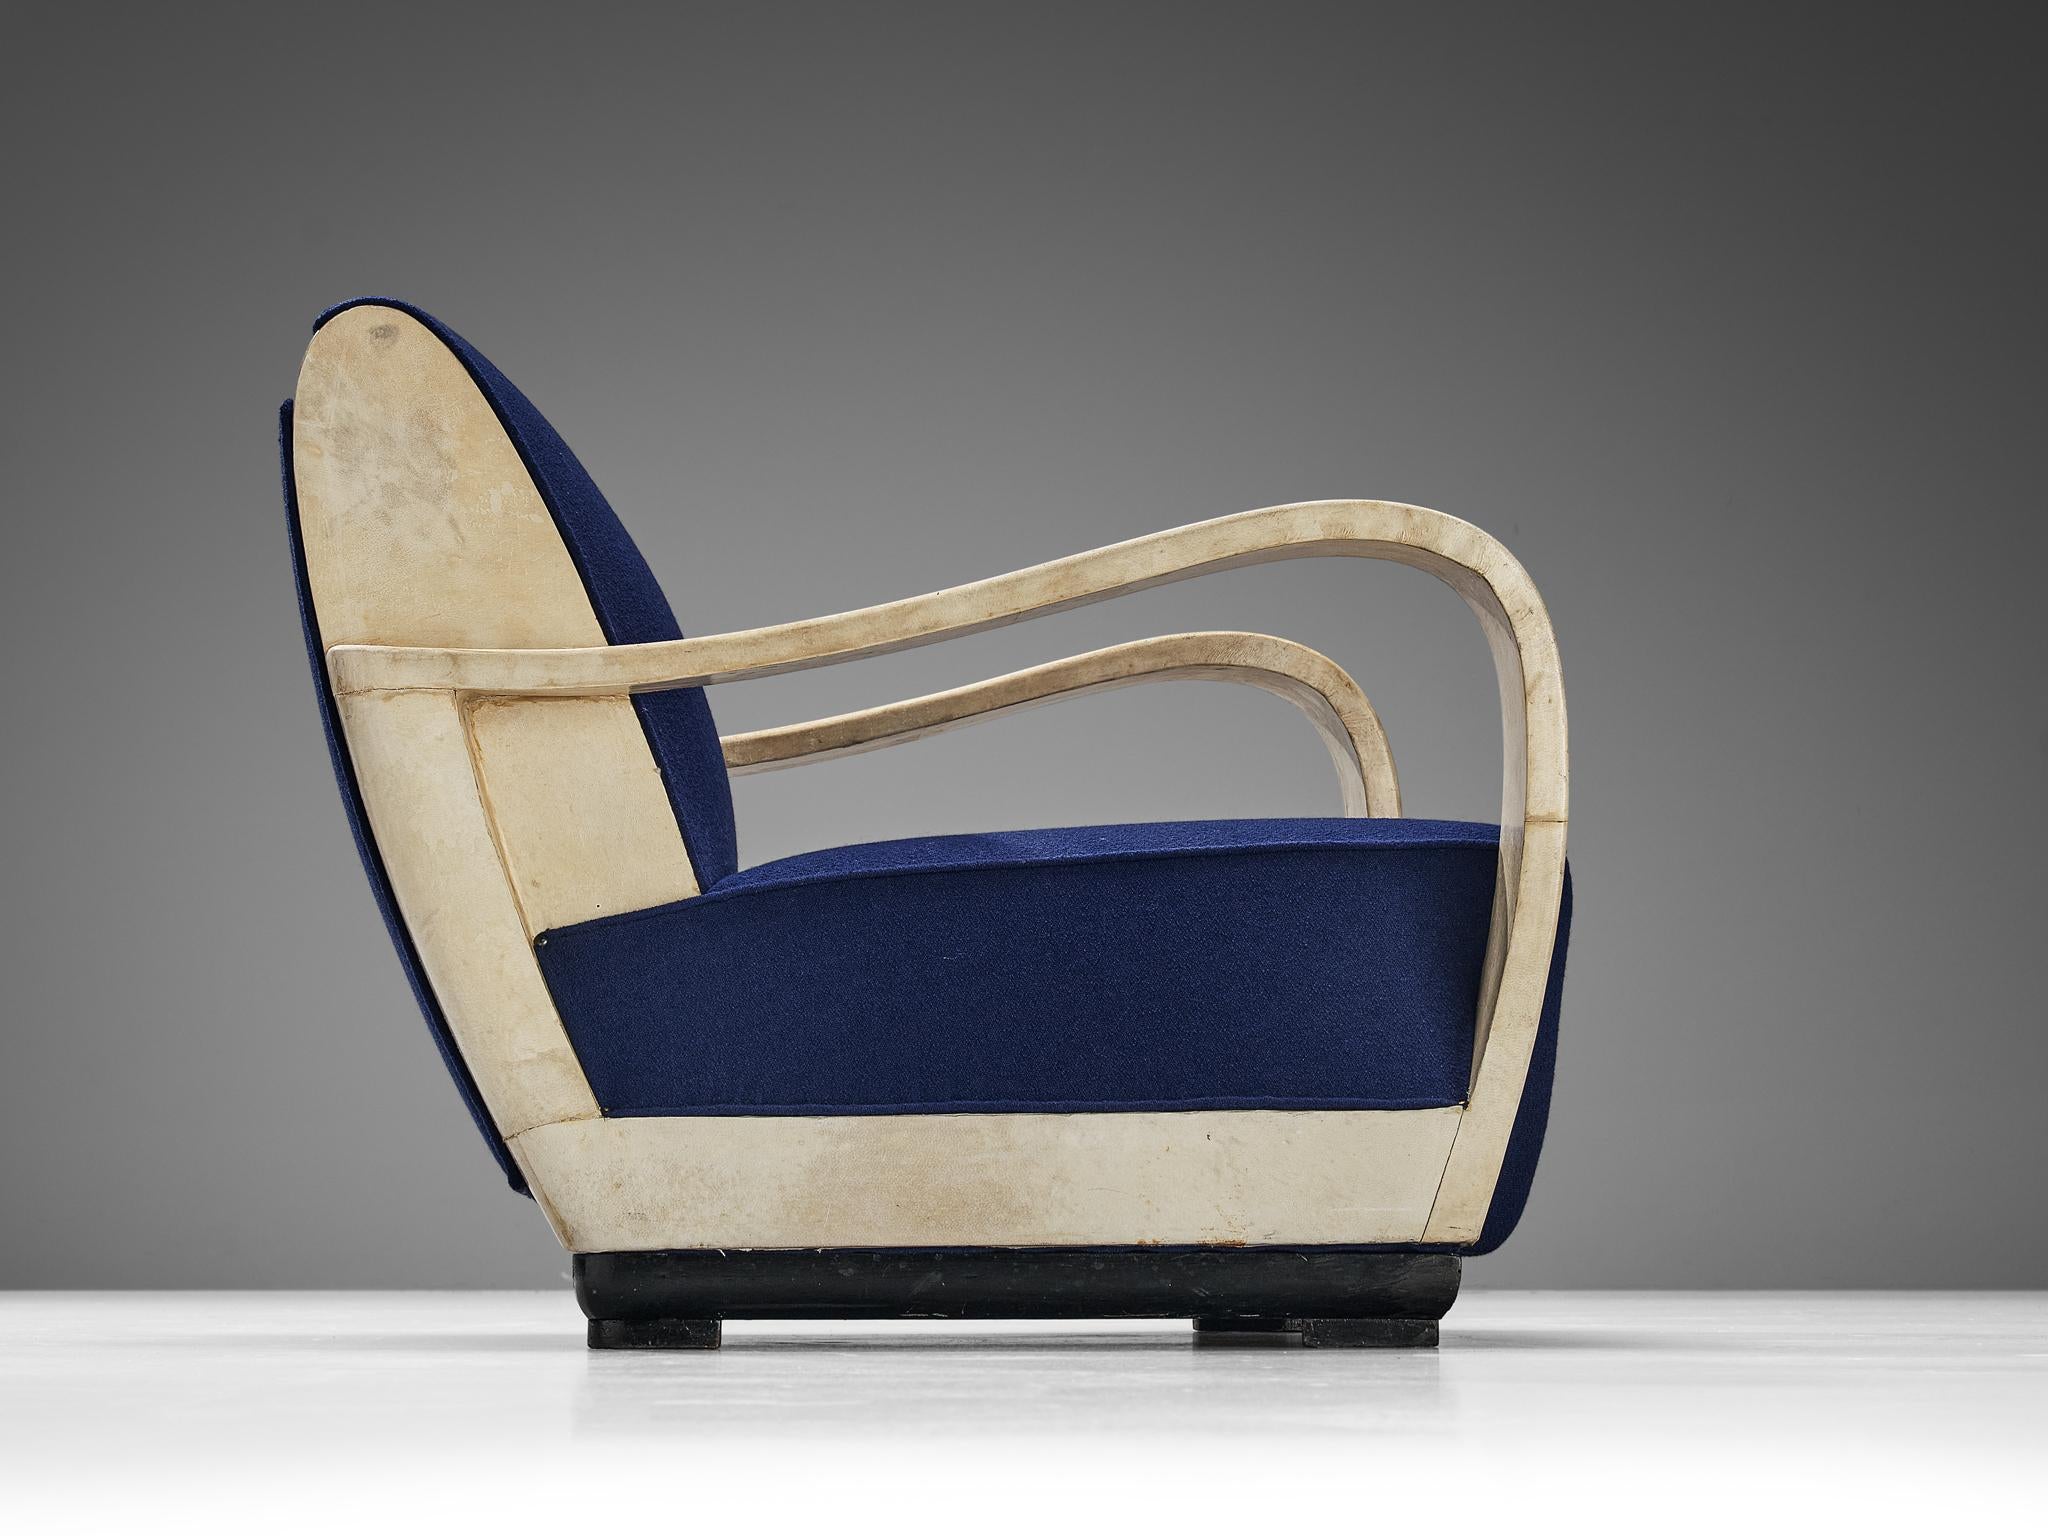 Unique Valzania Lounge Chair in Parchment and Blue Upholstery